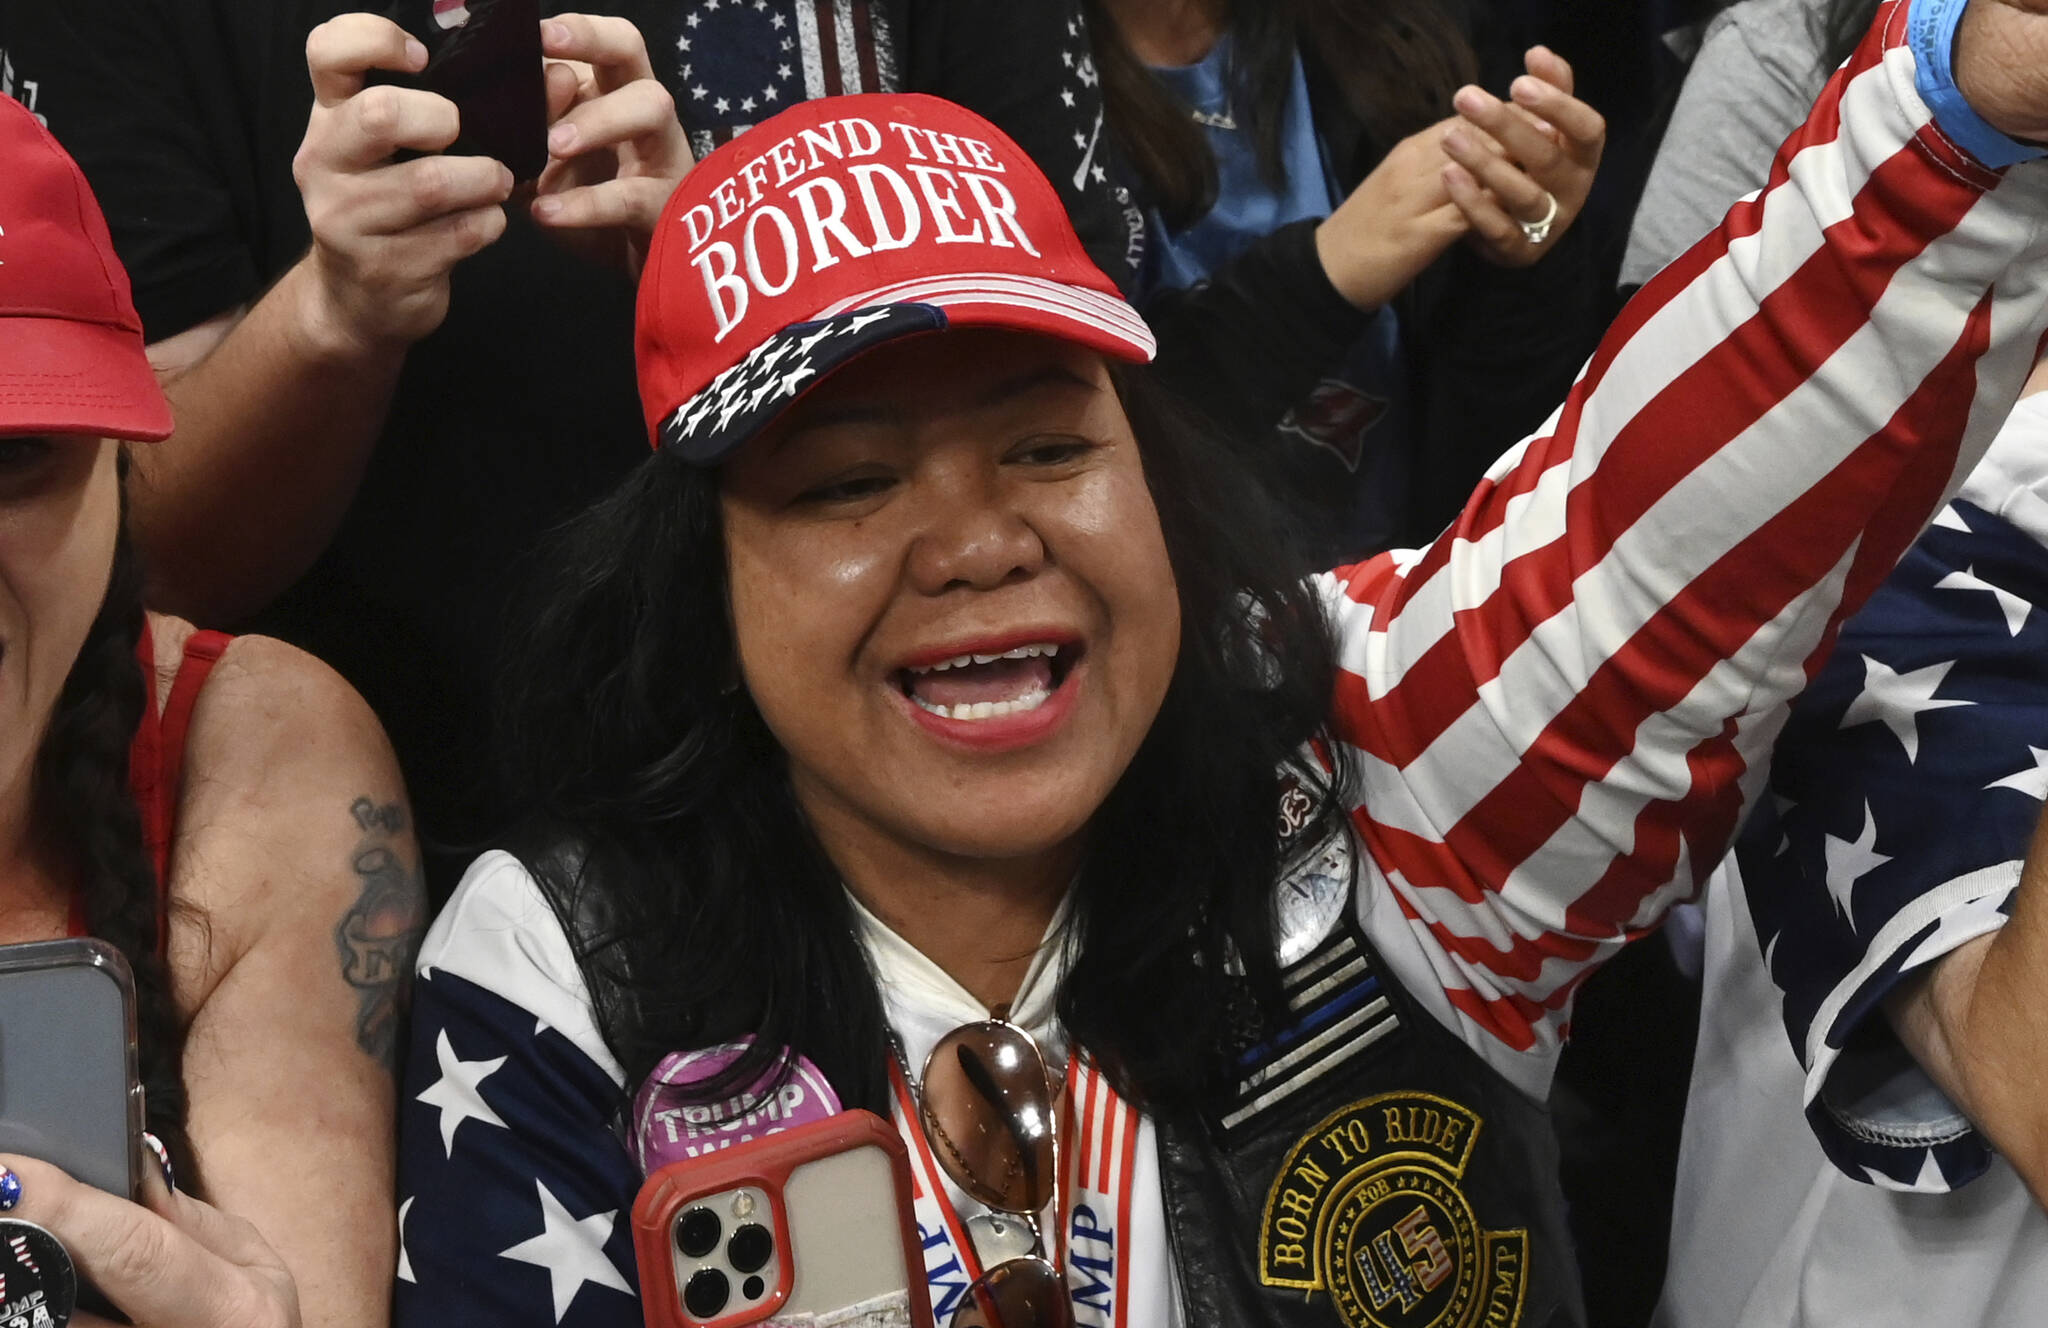 Mimi Israelah, center, cheers for Donald Trump inside the Alaska Airlines Center in Anchorage, Alaska, during a rally Saturday July 9, 2022. Two Anchorage police officers violated department policy during a traffic stop last month when Israelah, in town for a rally by former President Donald Trump showed a "white privilege card" instead of a driver's license and was not ticketed. (Bill Roth / Anchorage Daily News)